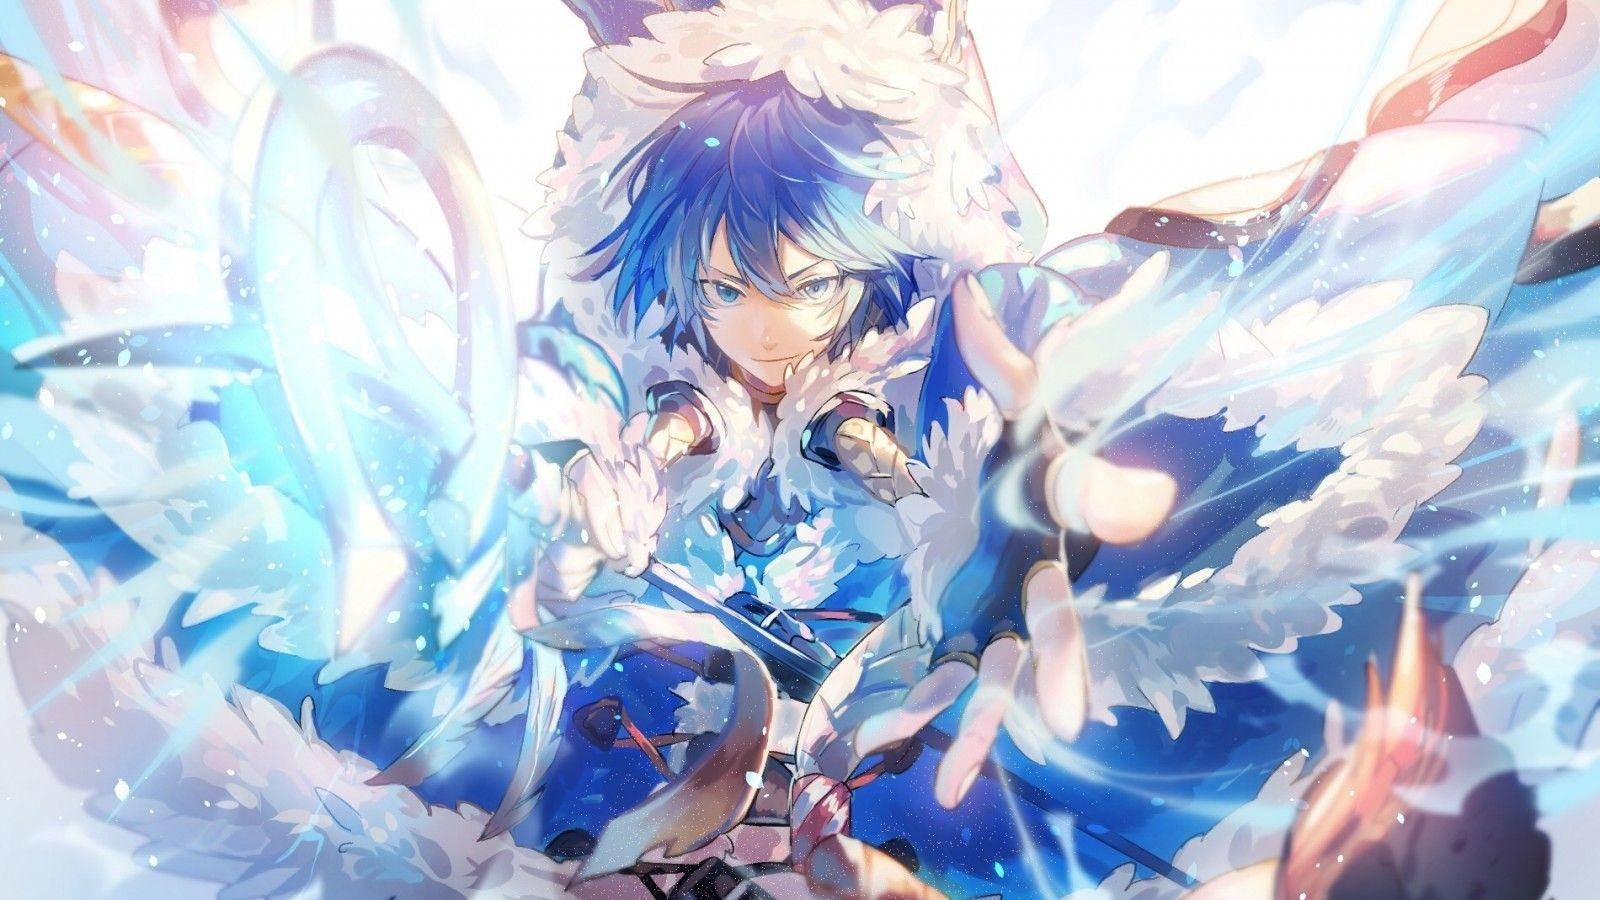 Anime Blue Boy From The Last Period Game Wallpaper